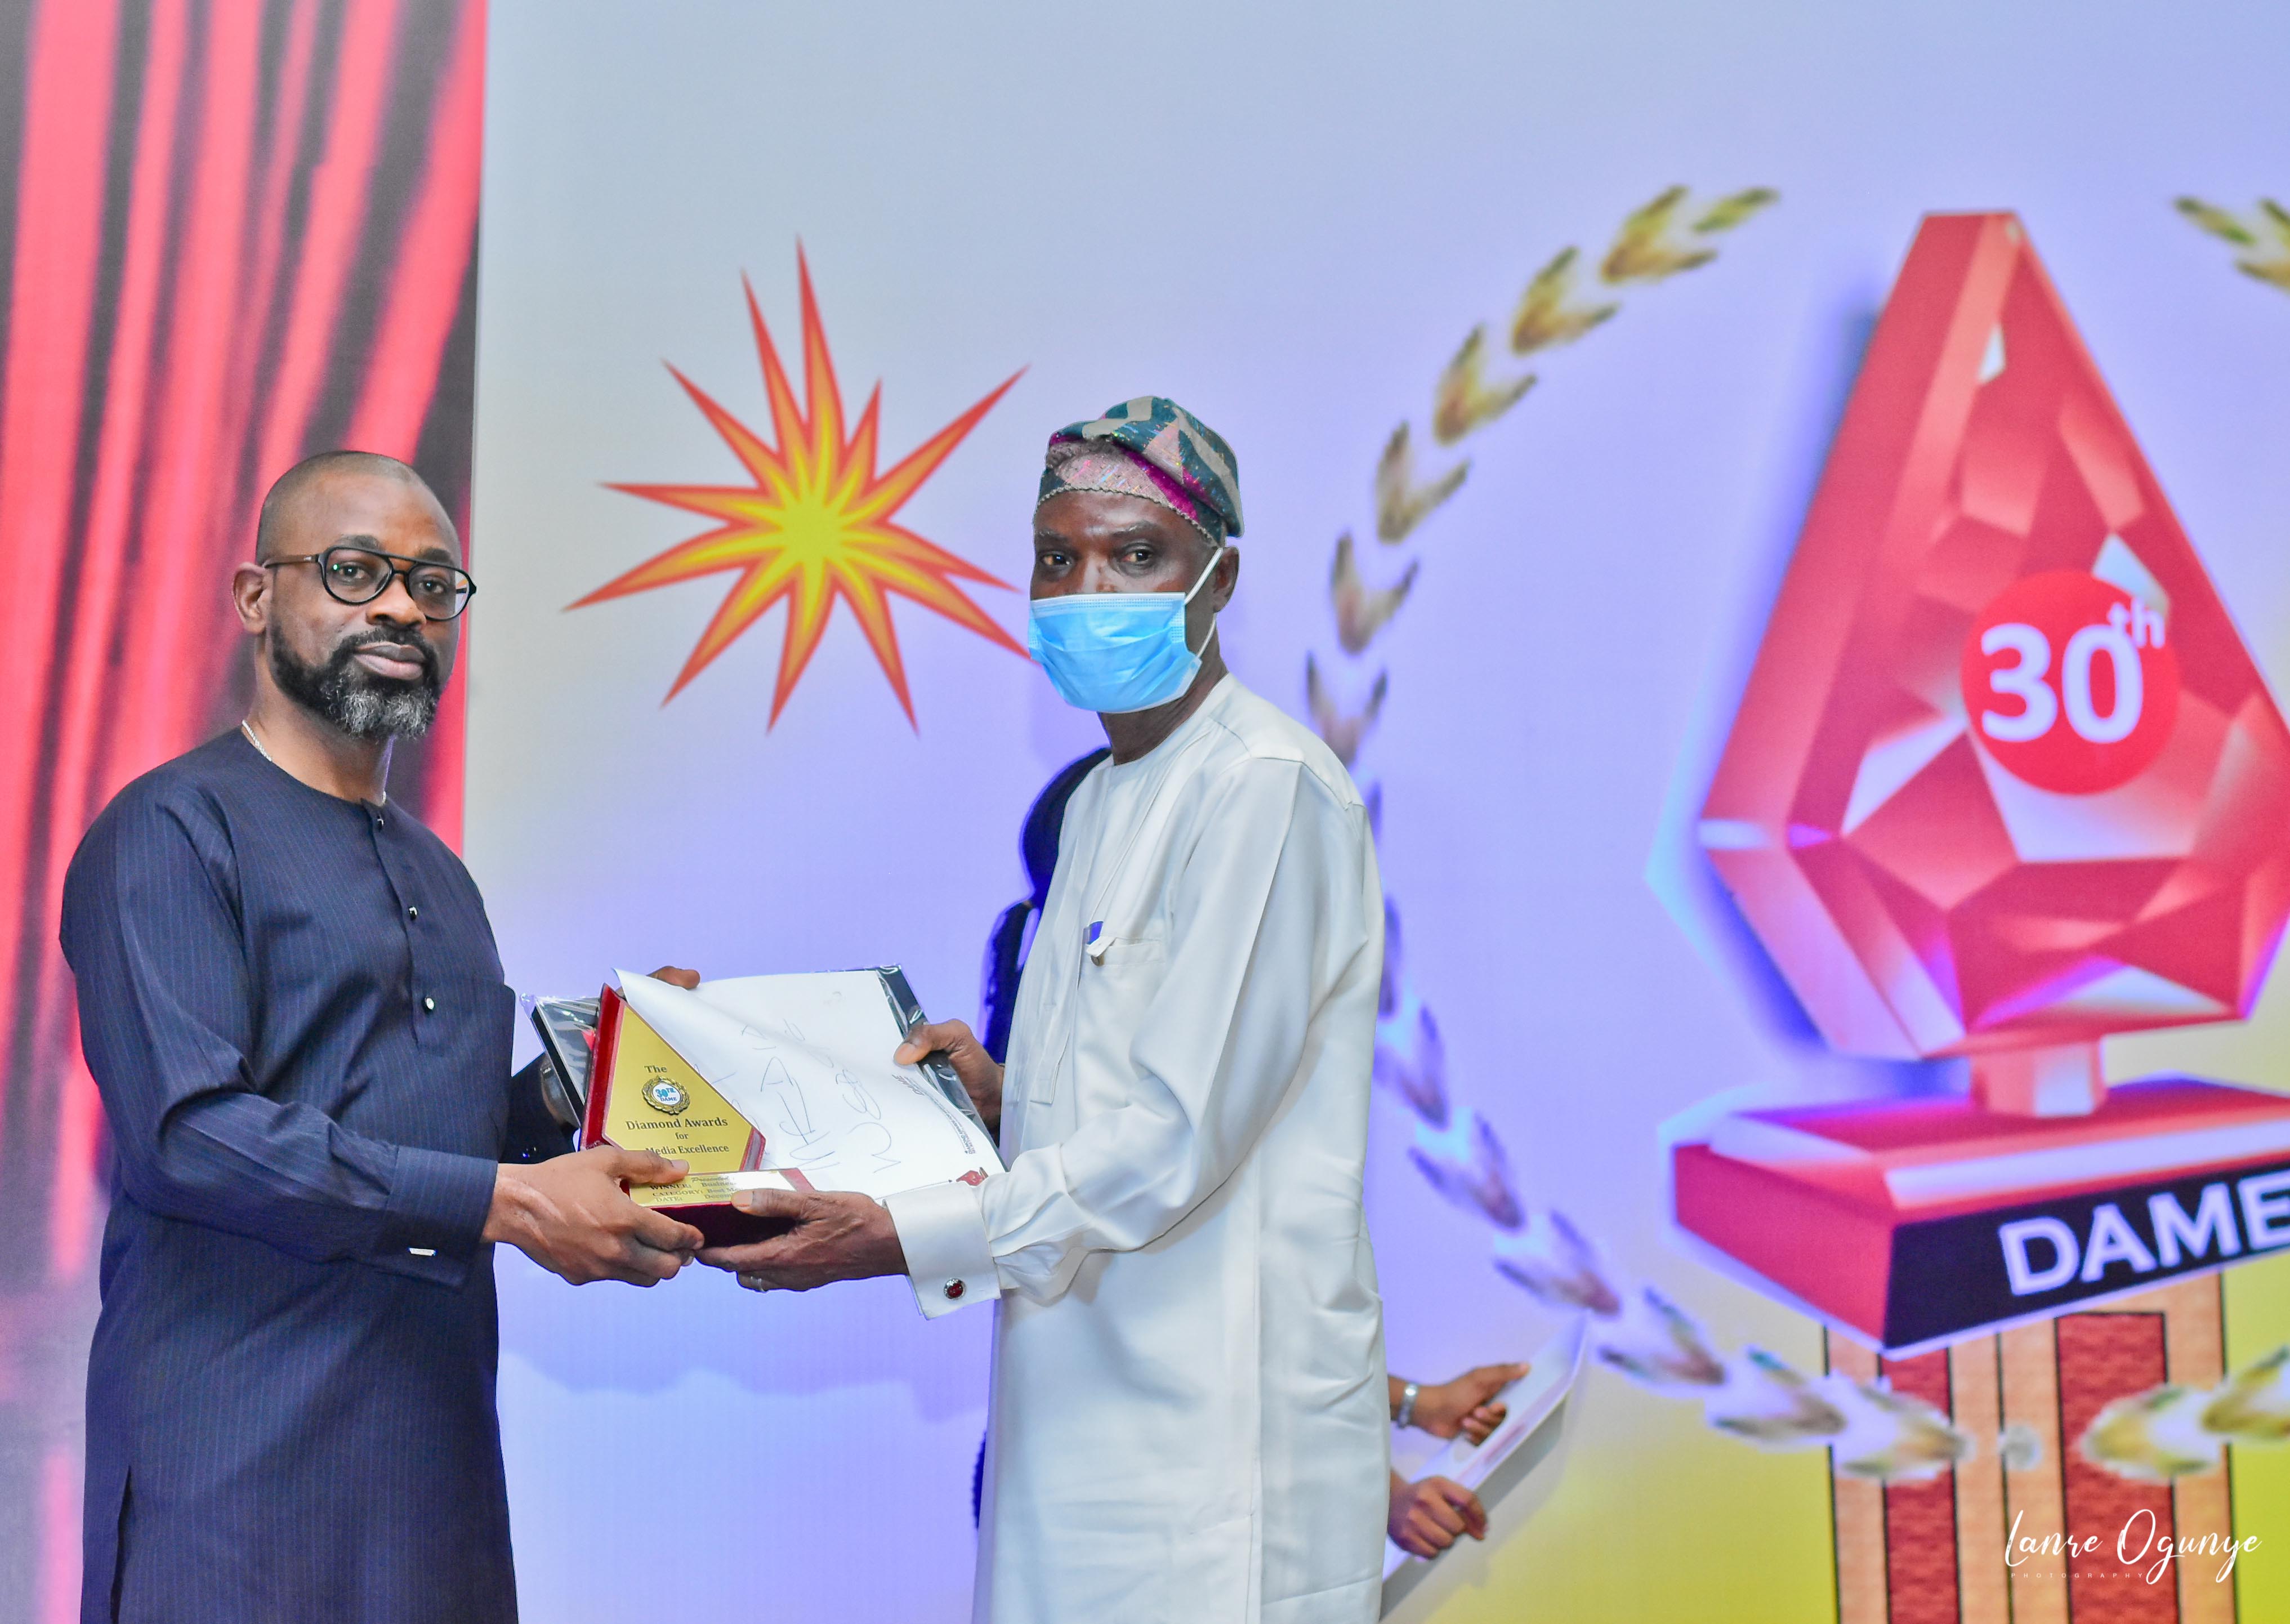 <span  class="uc_style_uc_tiles_grid_image_elementor_uc_items_attribute_title" style="color:#ffffff;">Best Designed Website Tayo Fagbule of Businessday receiving the prize</span>